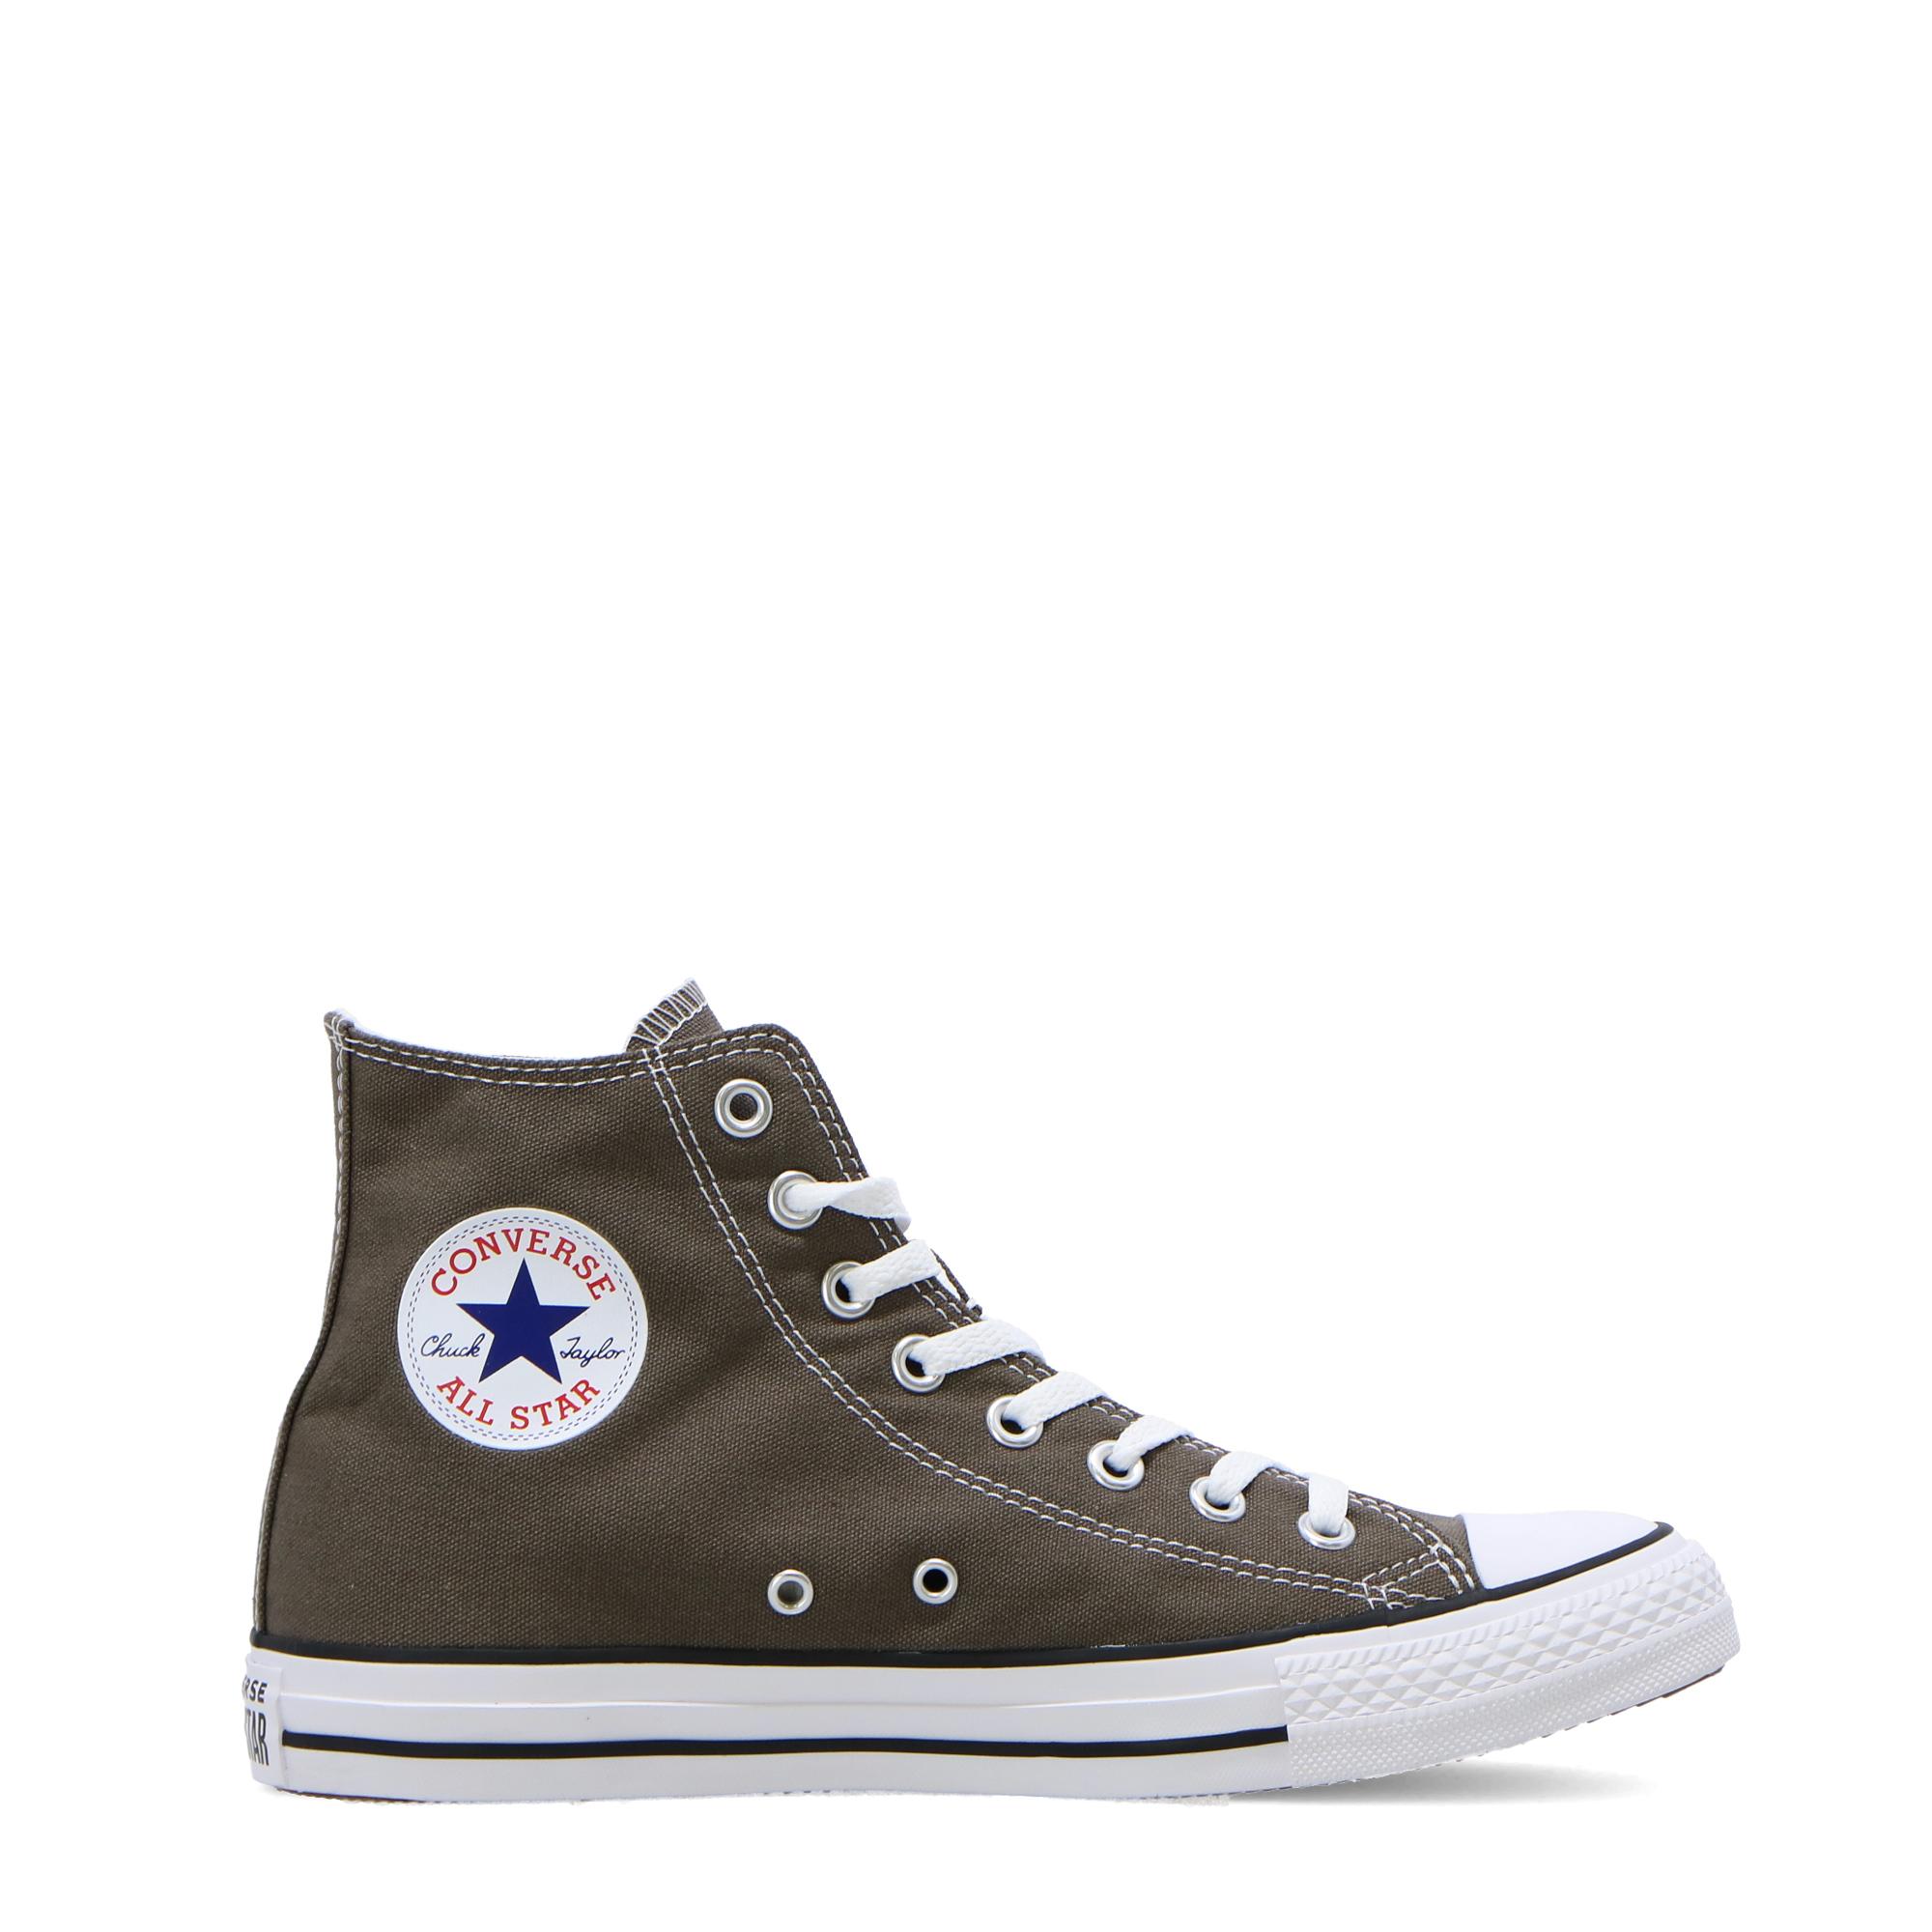 converse chuck taylor all star charcoal